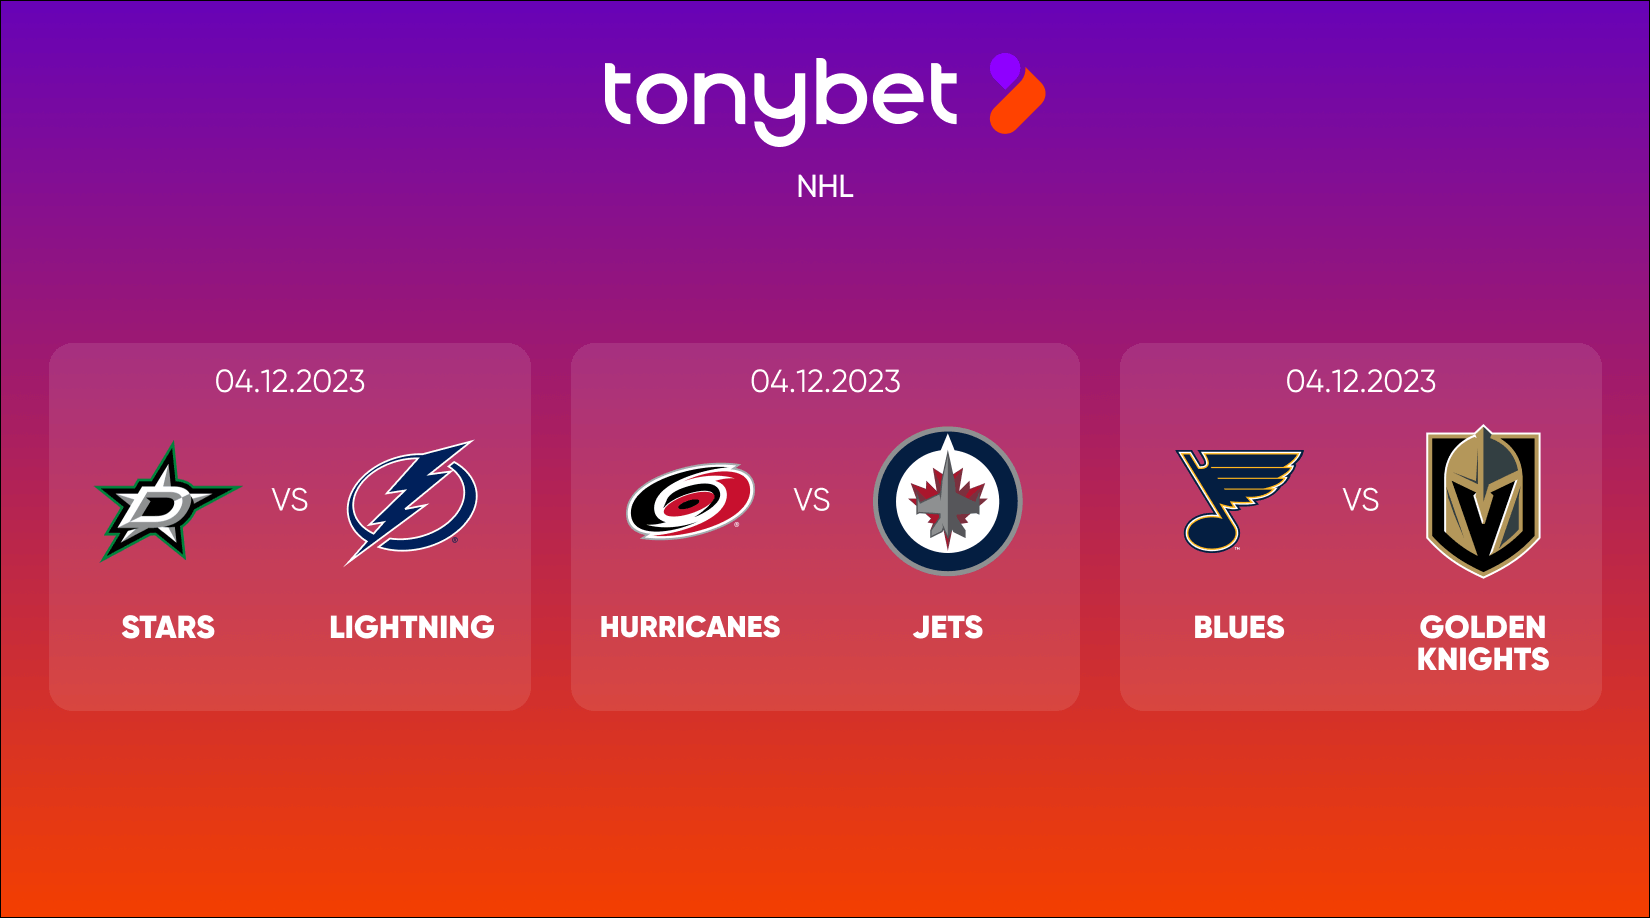 NHL. Midweek preview. Top 3 Midweek Matches. Stars vs Lightning, Hurricanes vs Jets, Blues vs Golden Knights